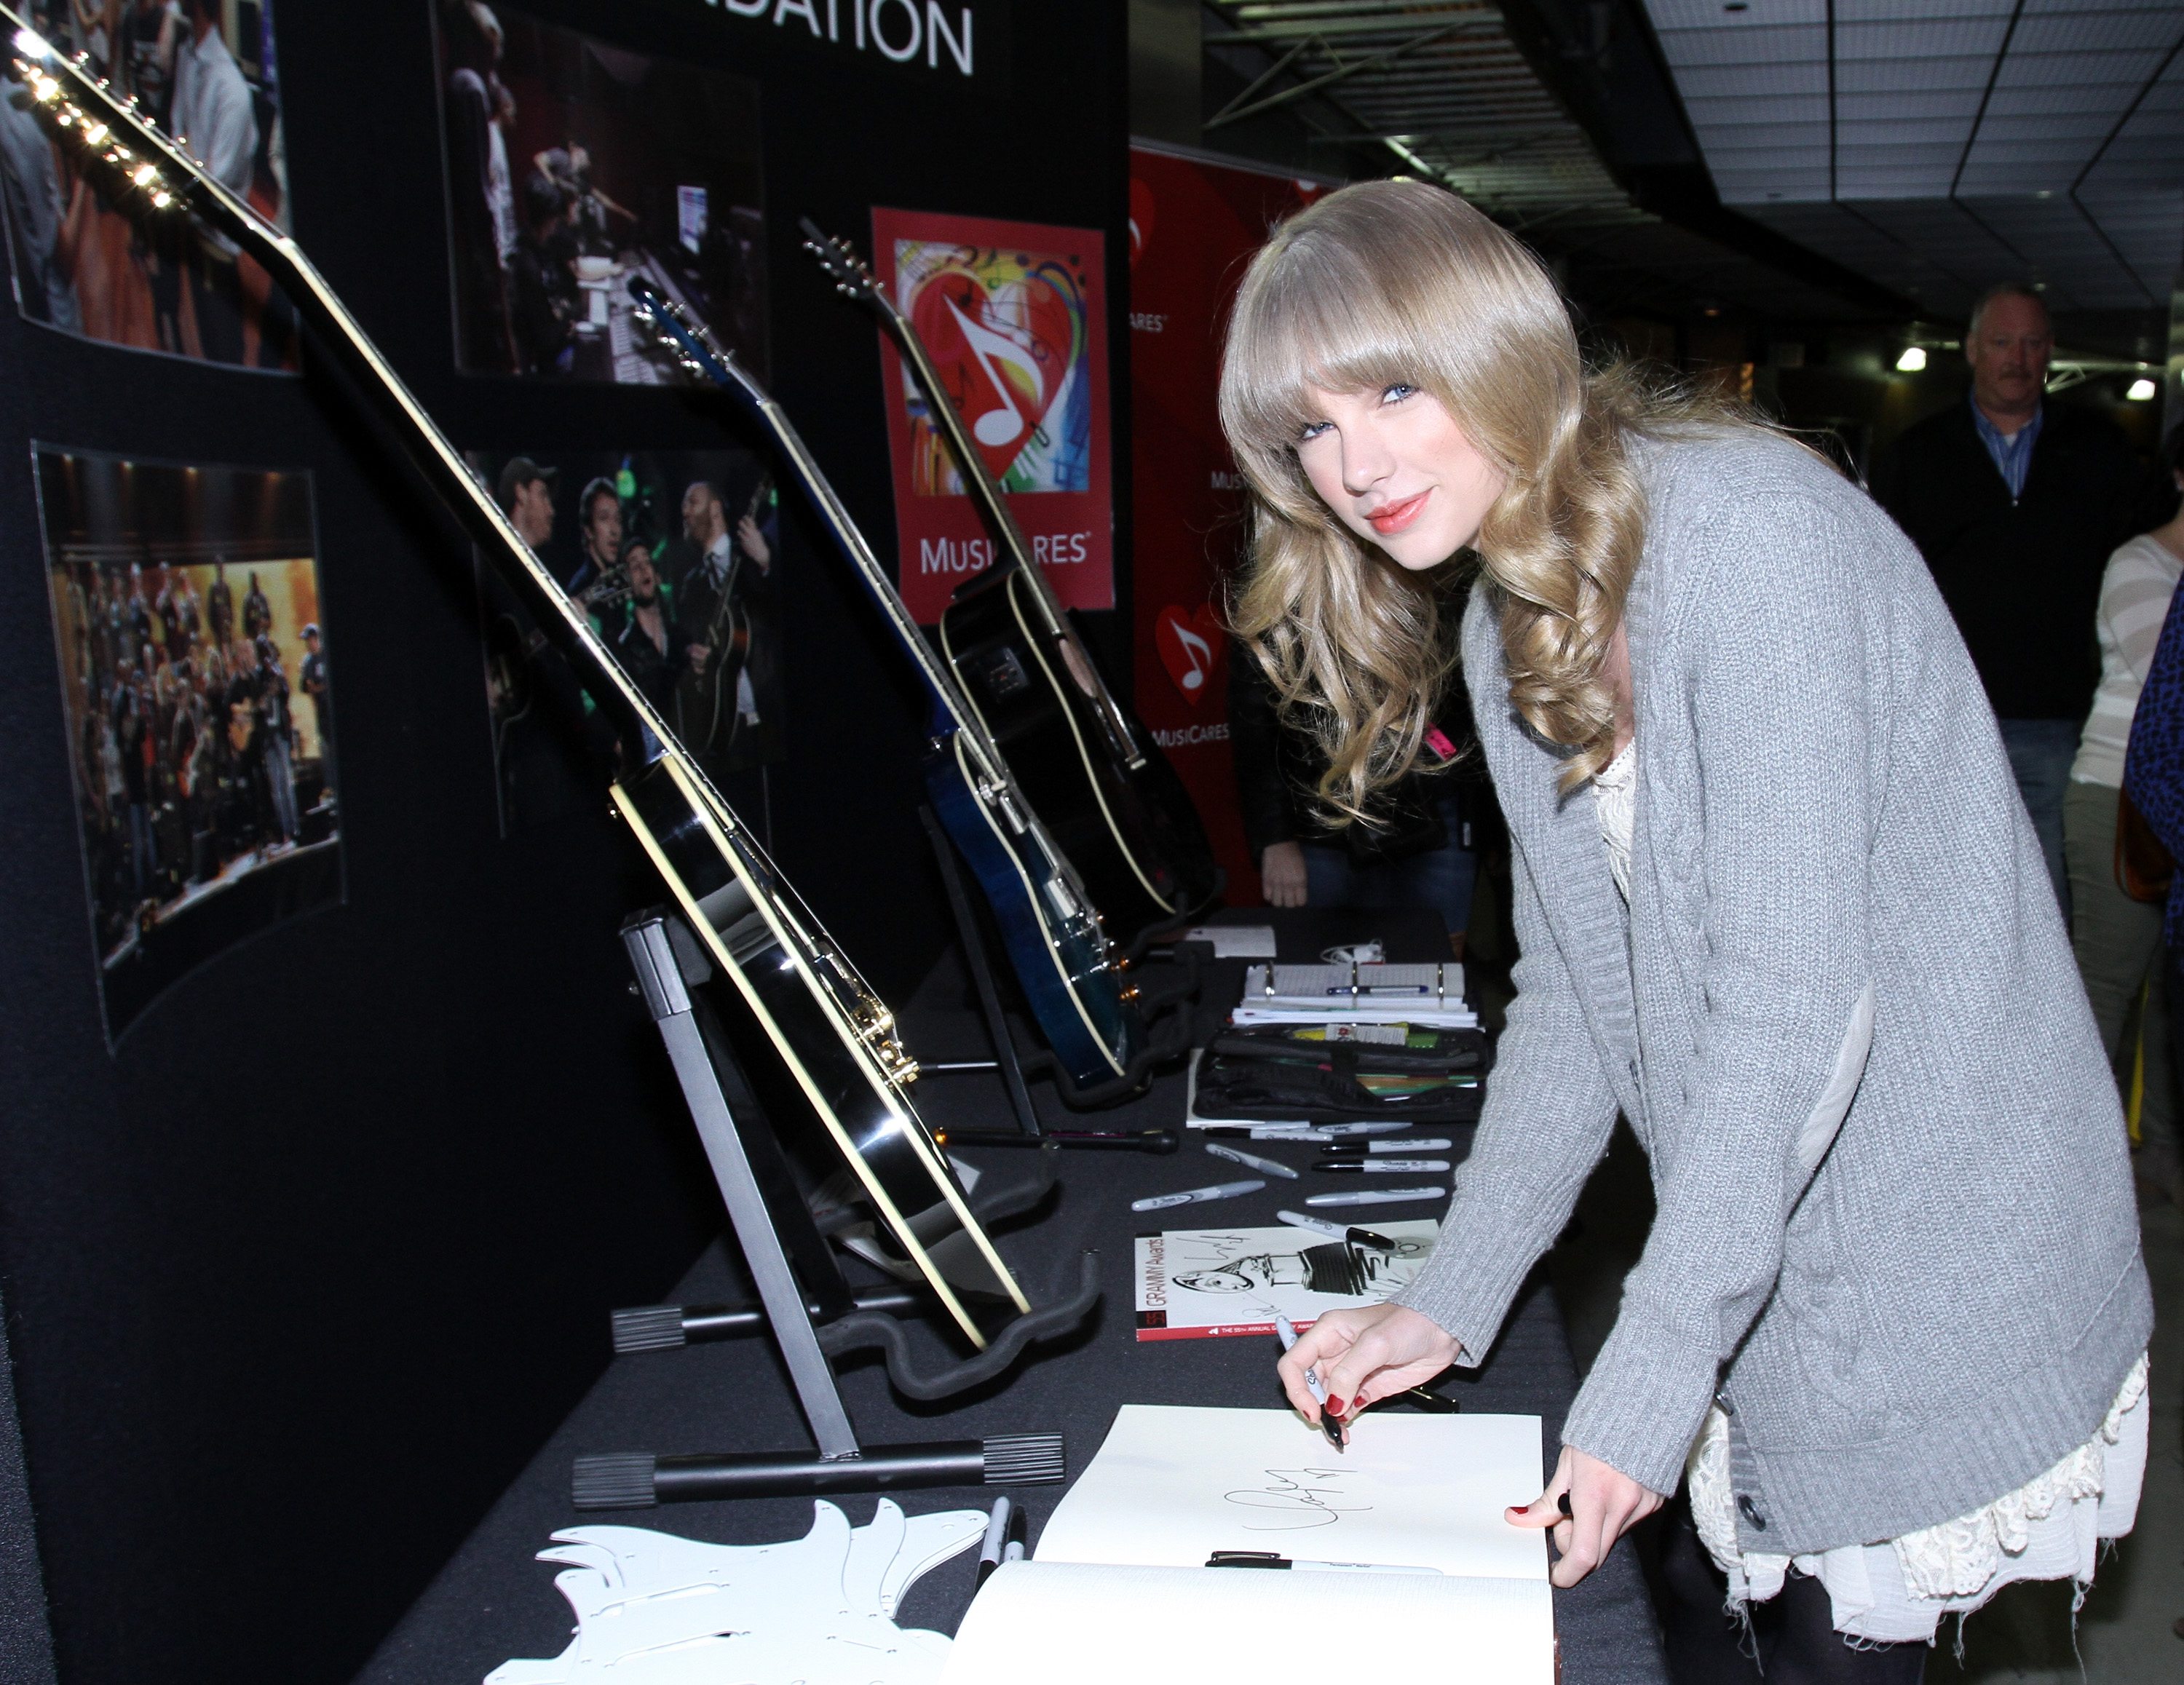 http://www.taylorpictures.net/albums/app/2013/grammycharitiessignings/001.jpg